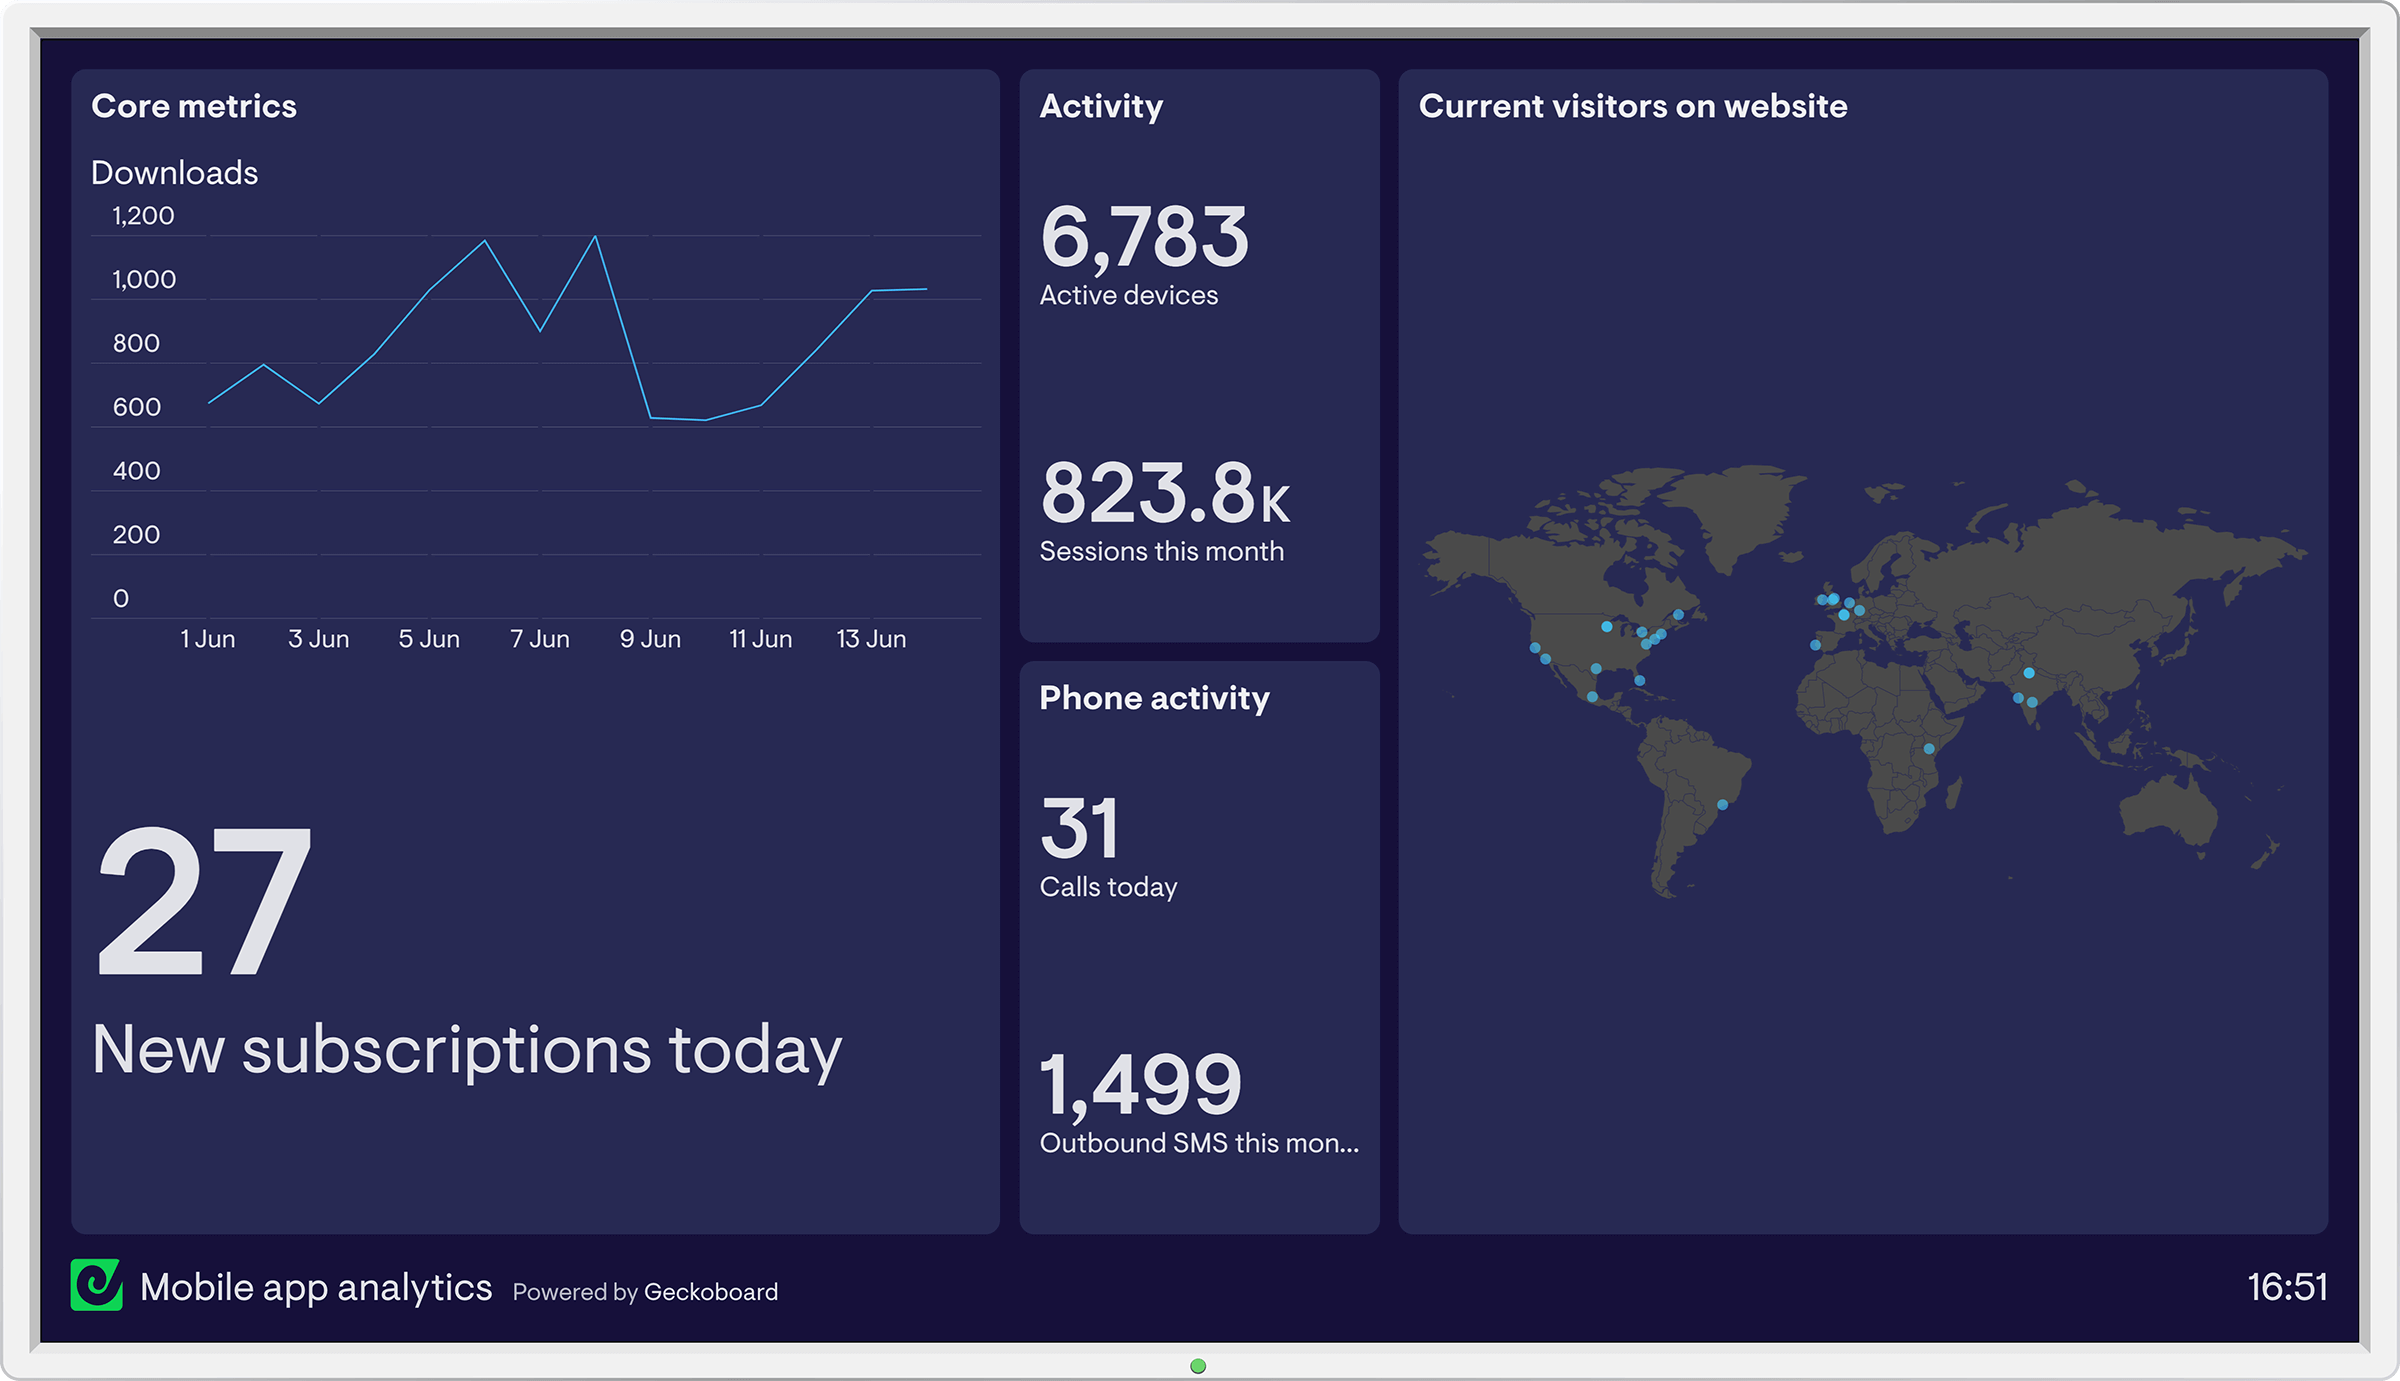 Flurry dashboard example